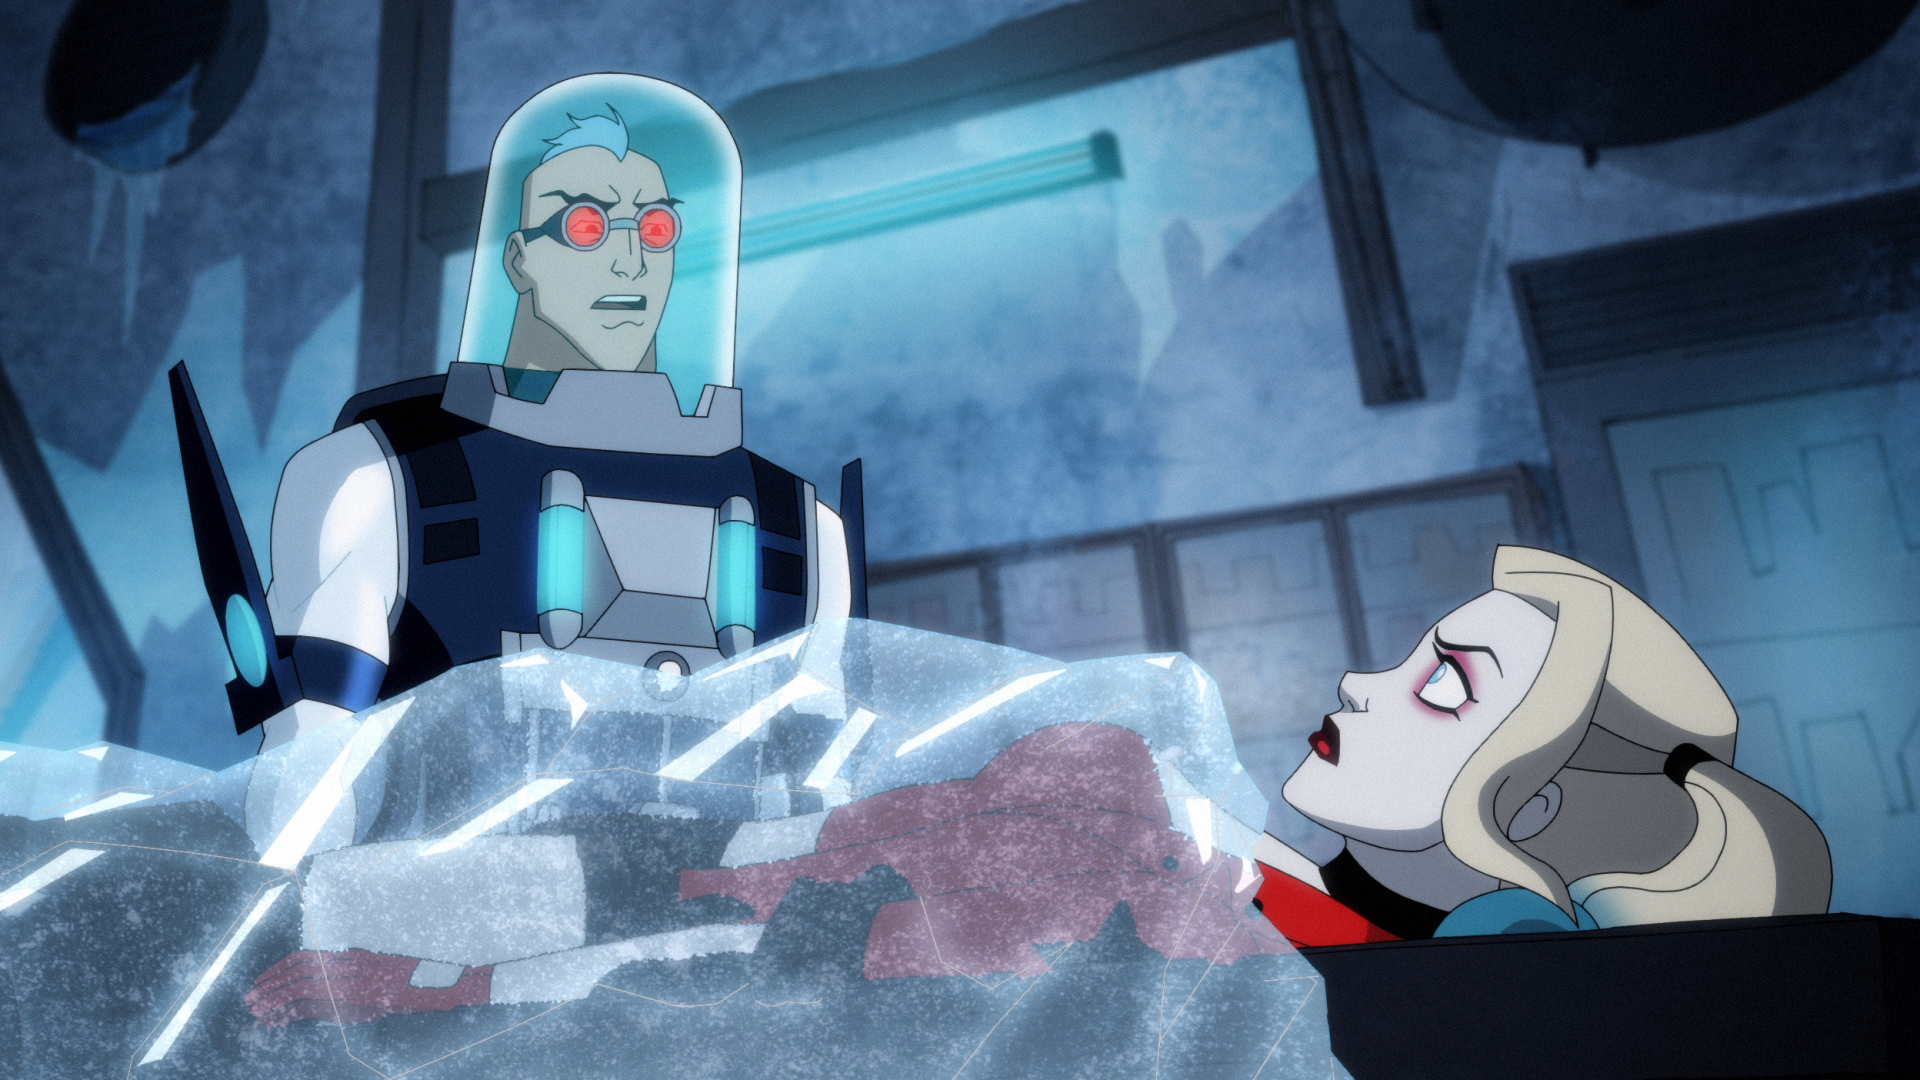 REVIEW: Harley Quinn S2 E4: Thawing Hearts